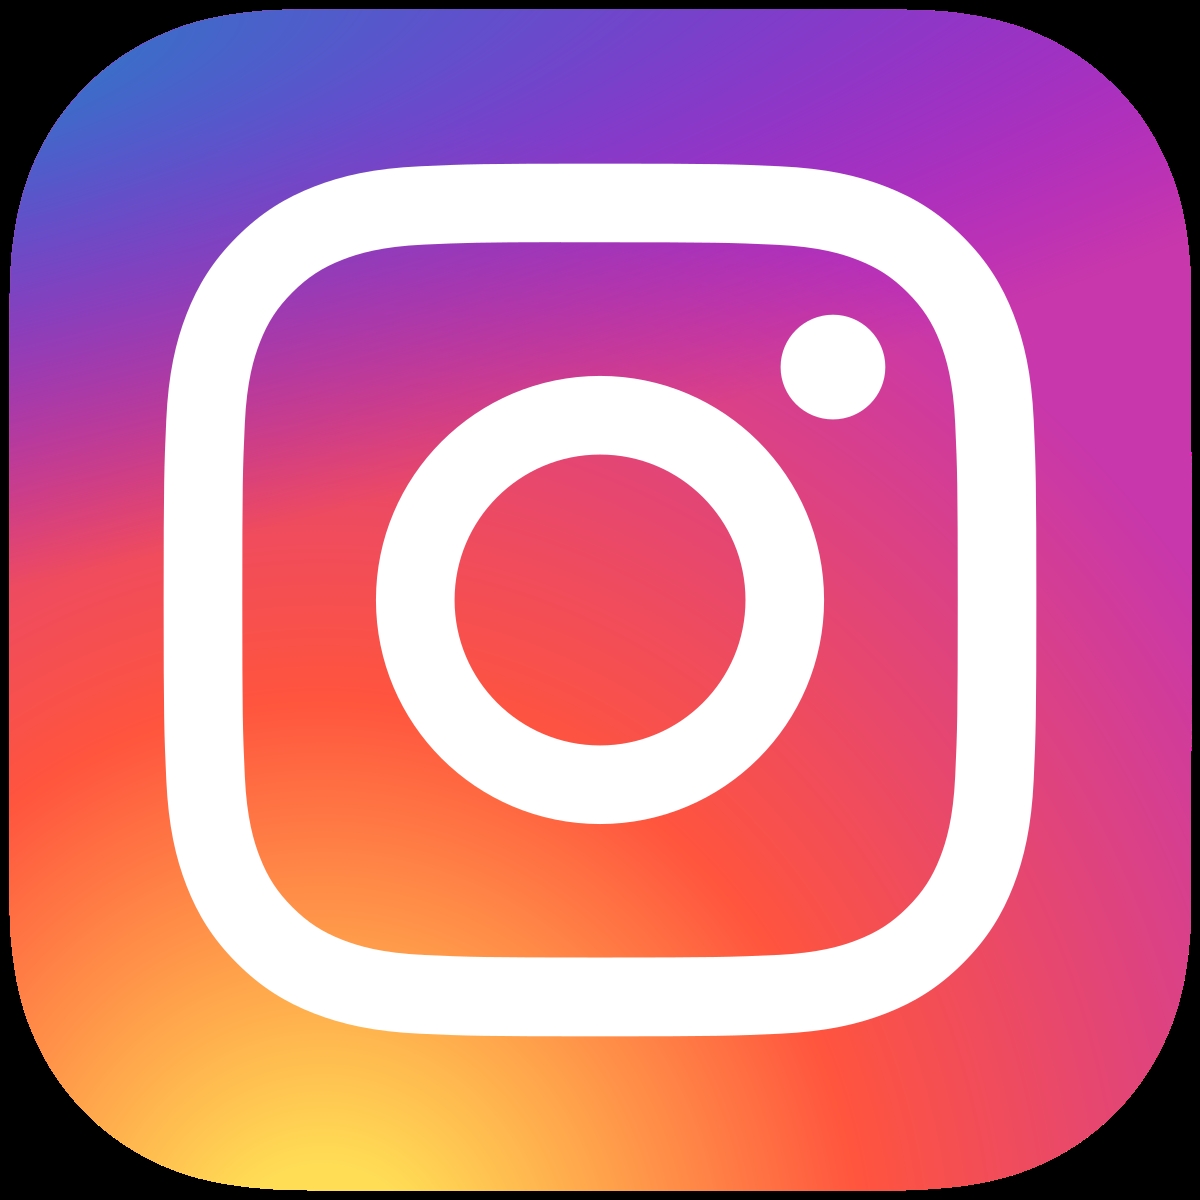 Buy Instagram Followers Has Become More Easier post thumbnail image